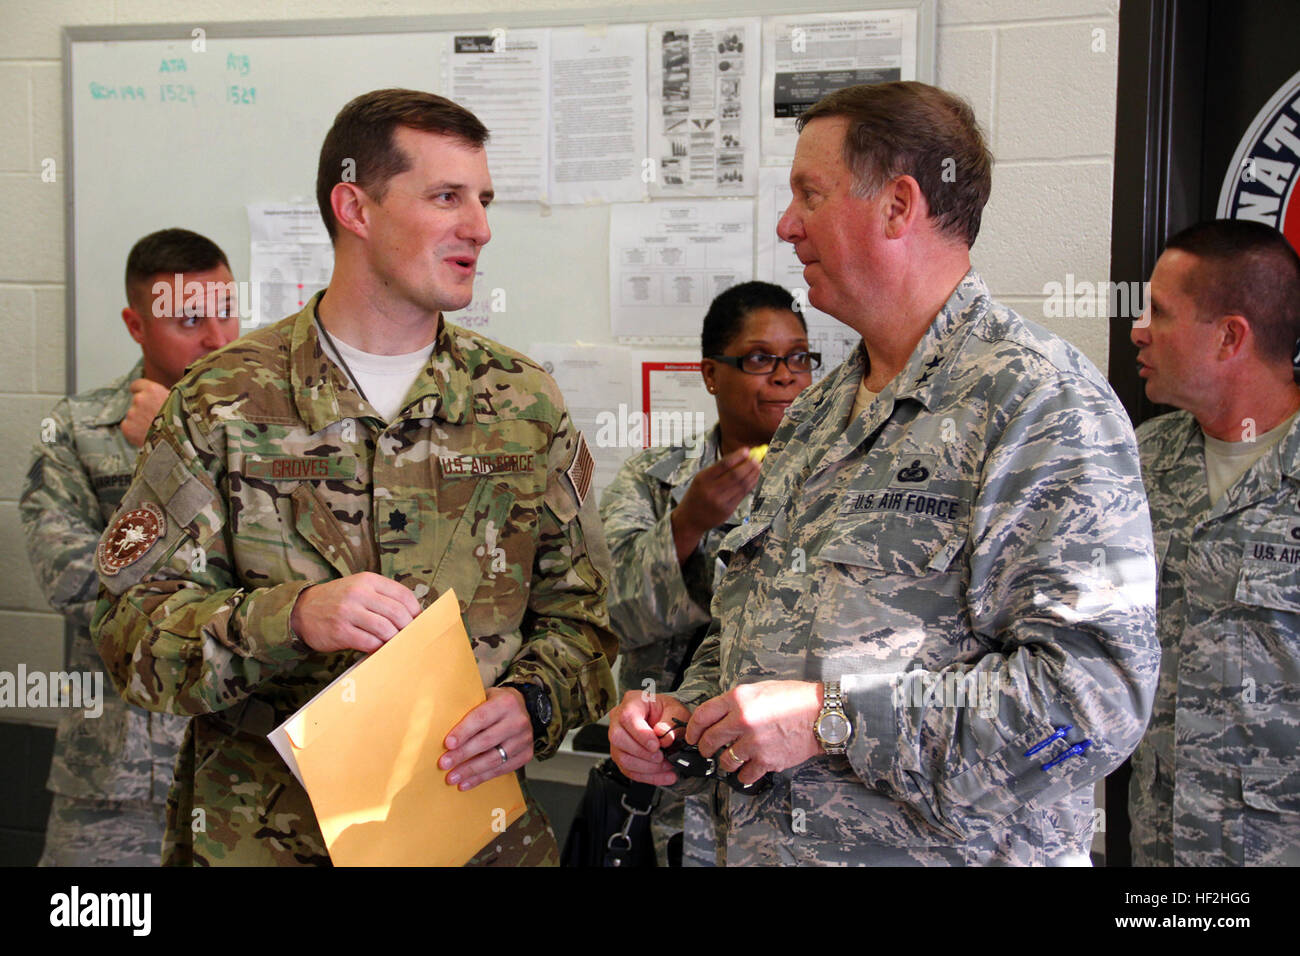 Lt. Col. Matt Groves, commander of the 123rd Contingency Response Group, speaks with Maj. Gen. Edward W. Tonini, Kentucky's adjutant general at the Kentucky Air National Guard Base in Louisville, Ky., Oct. 2, 2014. The 123rd deployed to West Africa to to set up a logistics hub in support of Operation United Assistance. (U.S. Army National Guard photo by Staff Sgt. Scott Raymond) Kentucky Guardsmen deploy to West Africa 141002-Z-GN092-031 Stock Photo